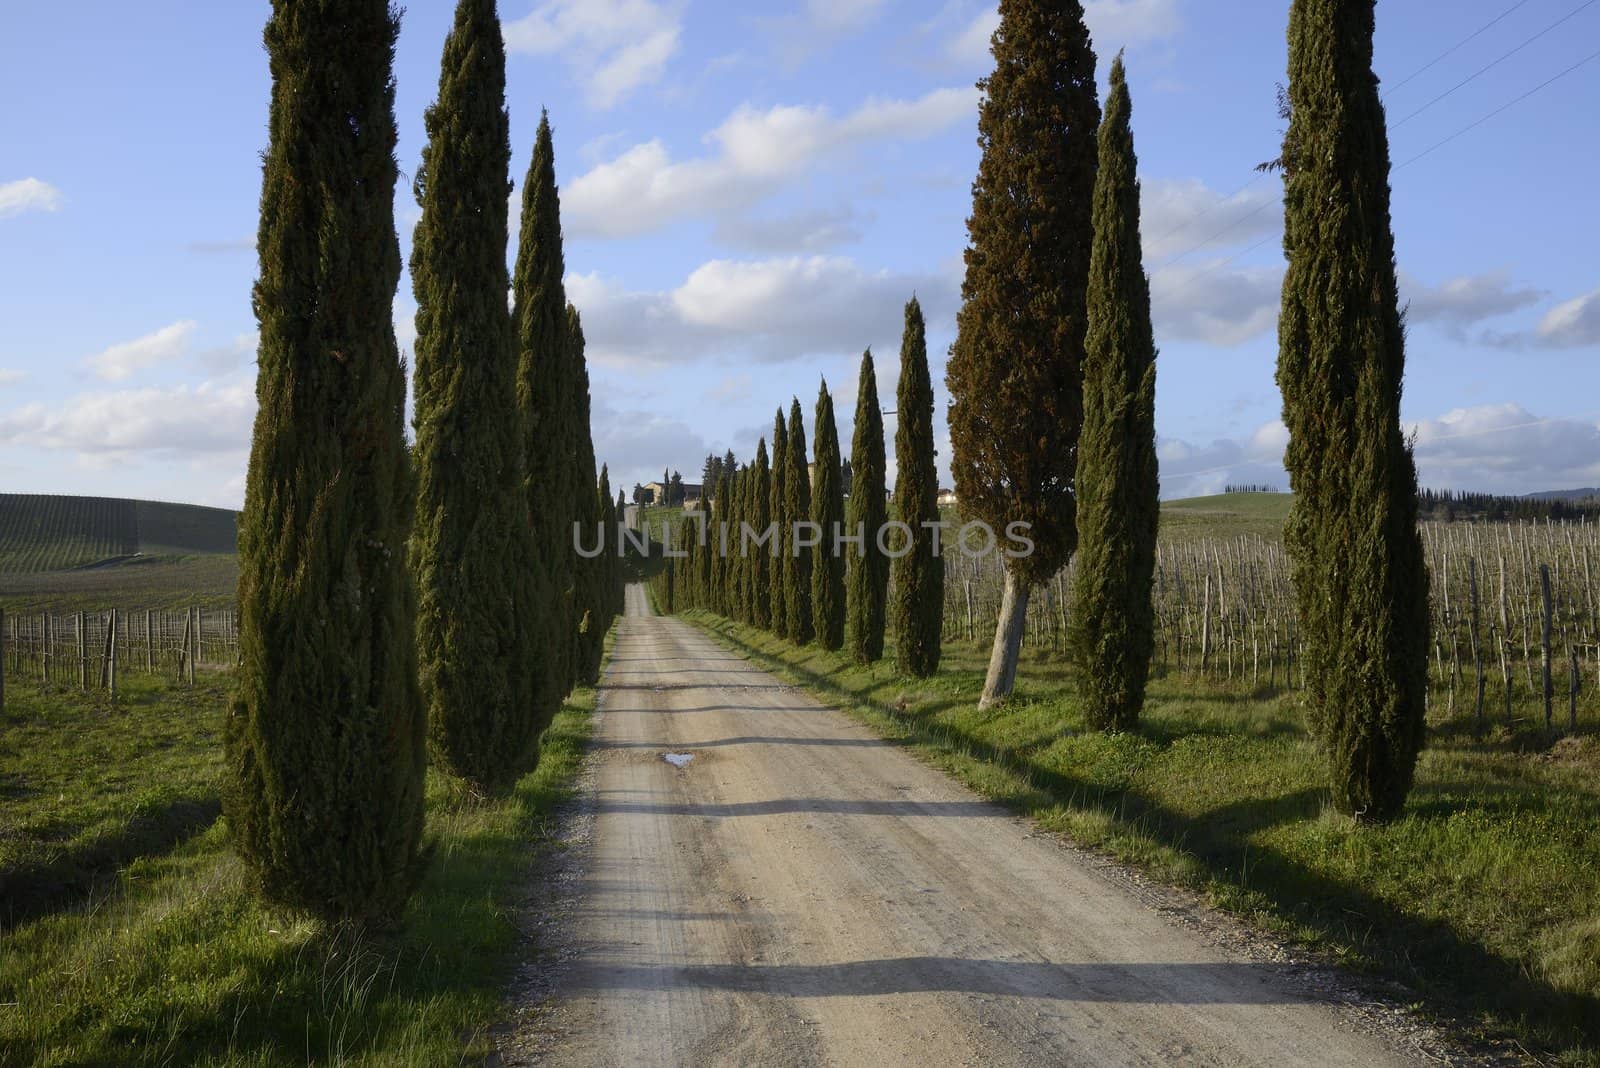 A classical view of the tuscan country